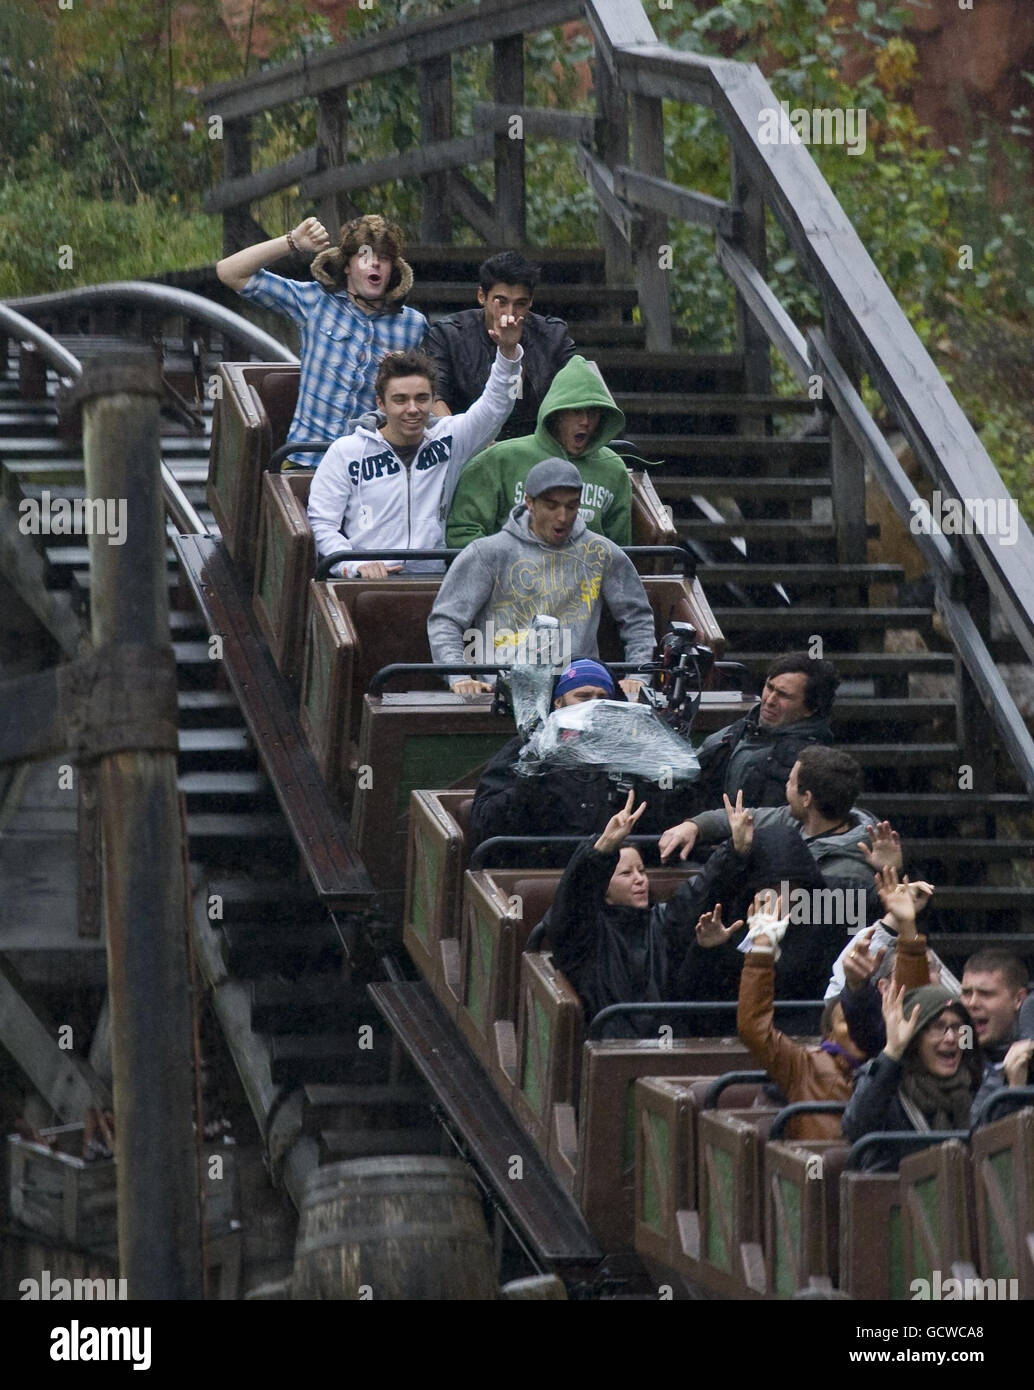 The Wanted during a visit to Disneyland Paris in France. Stock Photo